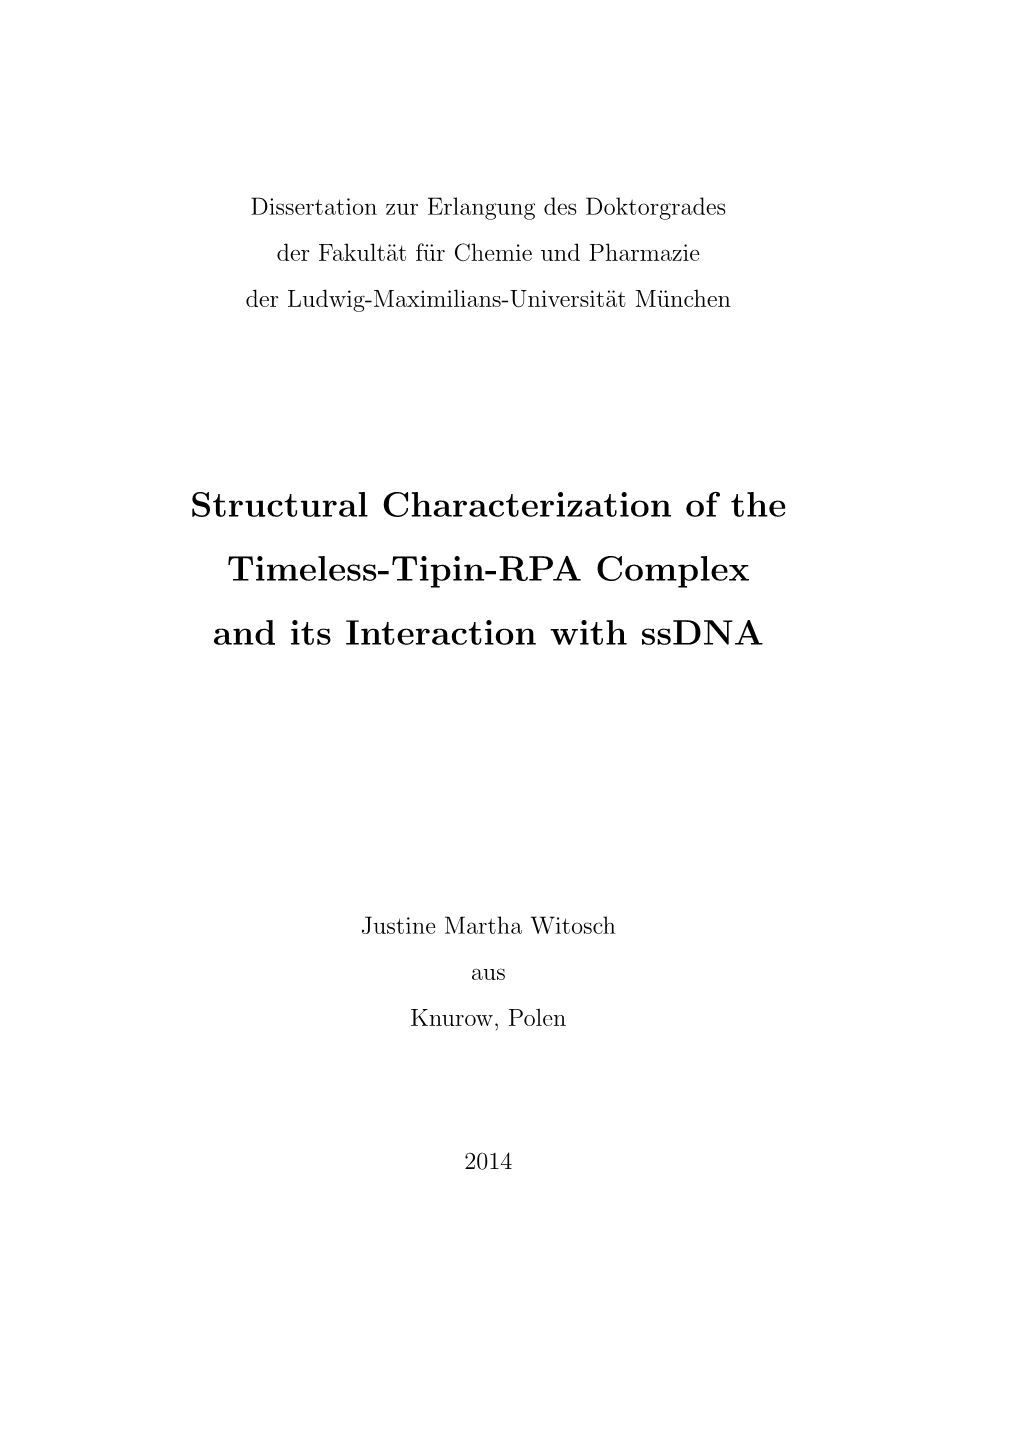 Structural Characterization of the Timeless-Tipin-RPA Complex and Its Interaction with Ssdna